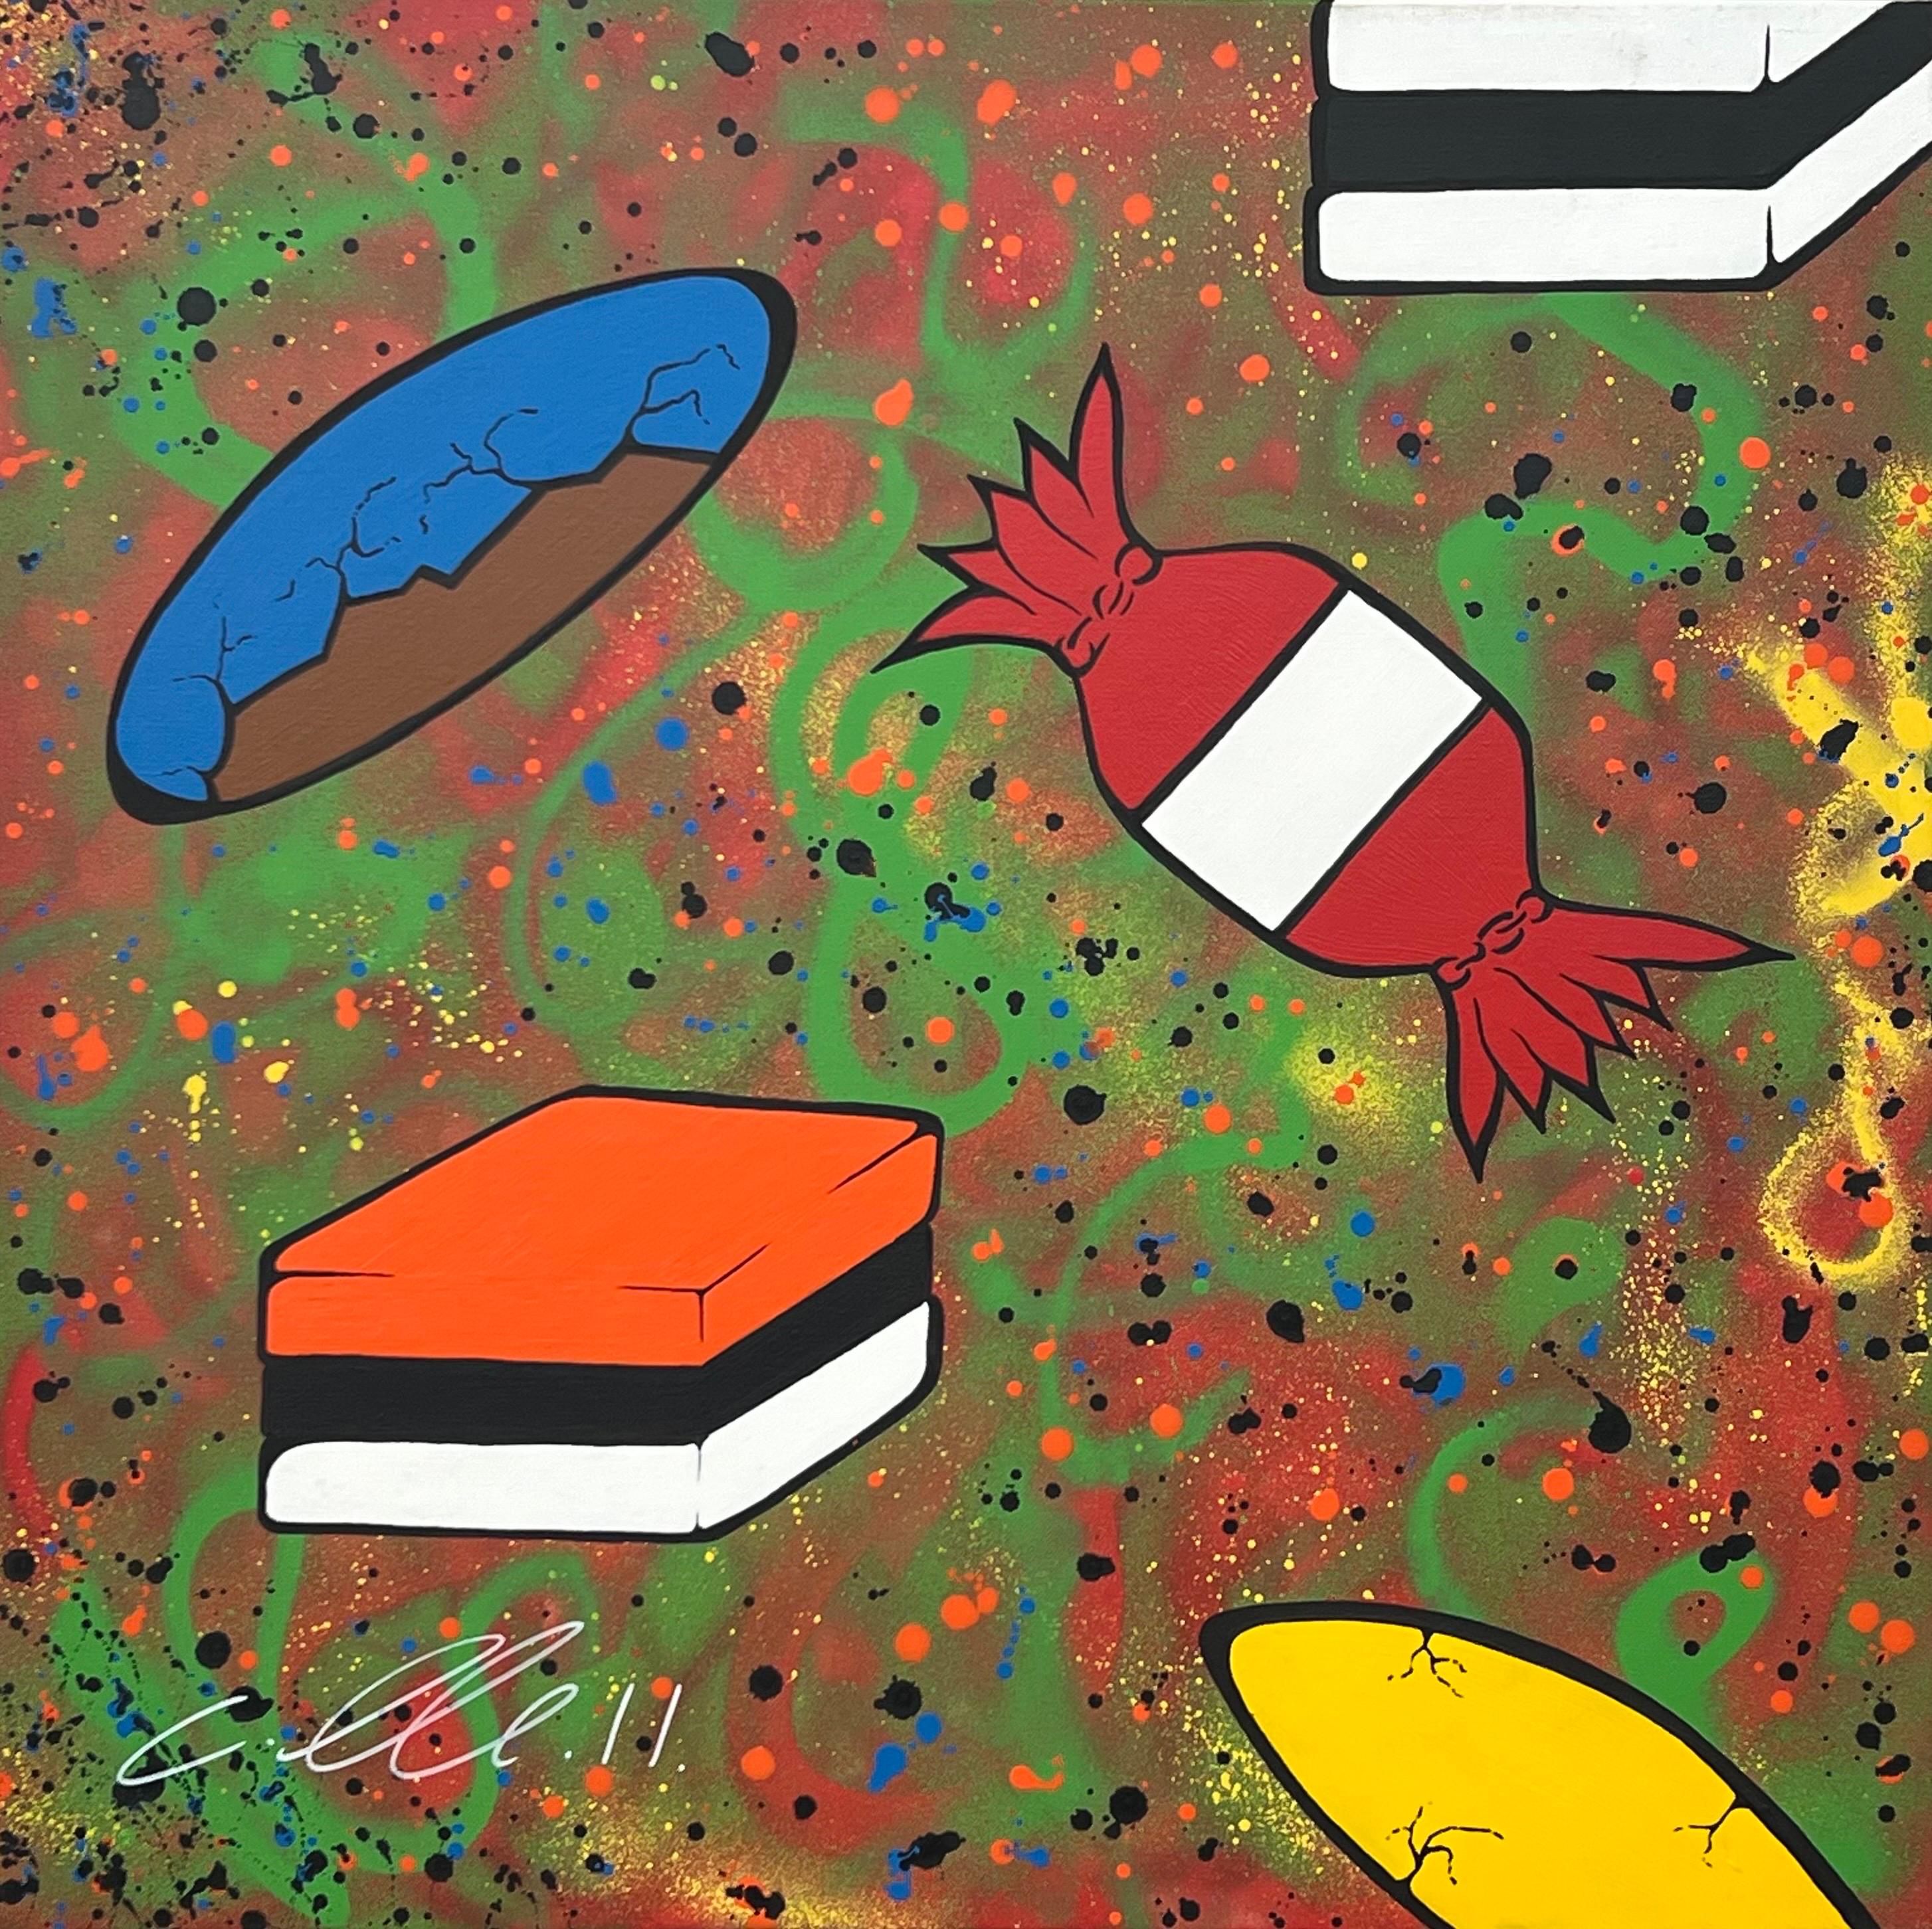 Chris Pegg Interior Painting - Liquorice Sweets Pop Art on Abstract Background by British Graffiti Artist